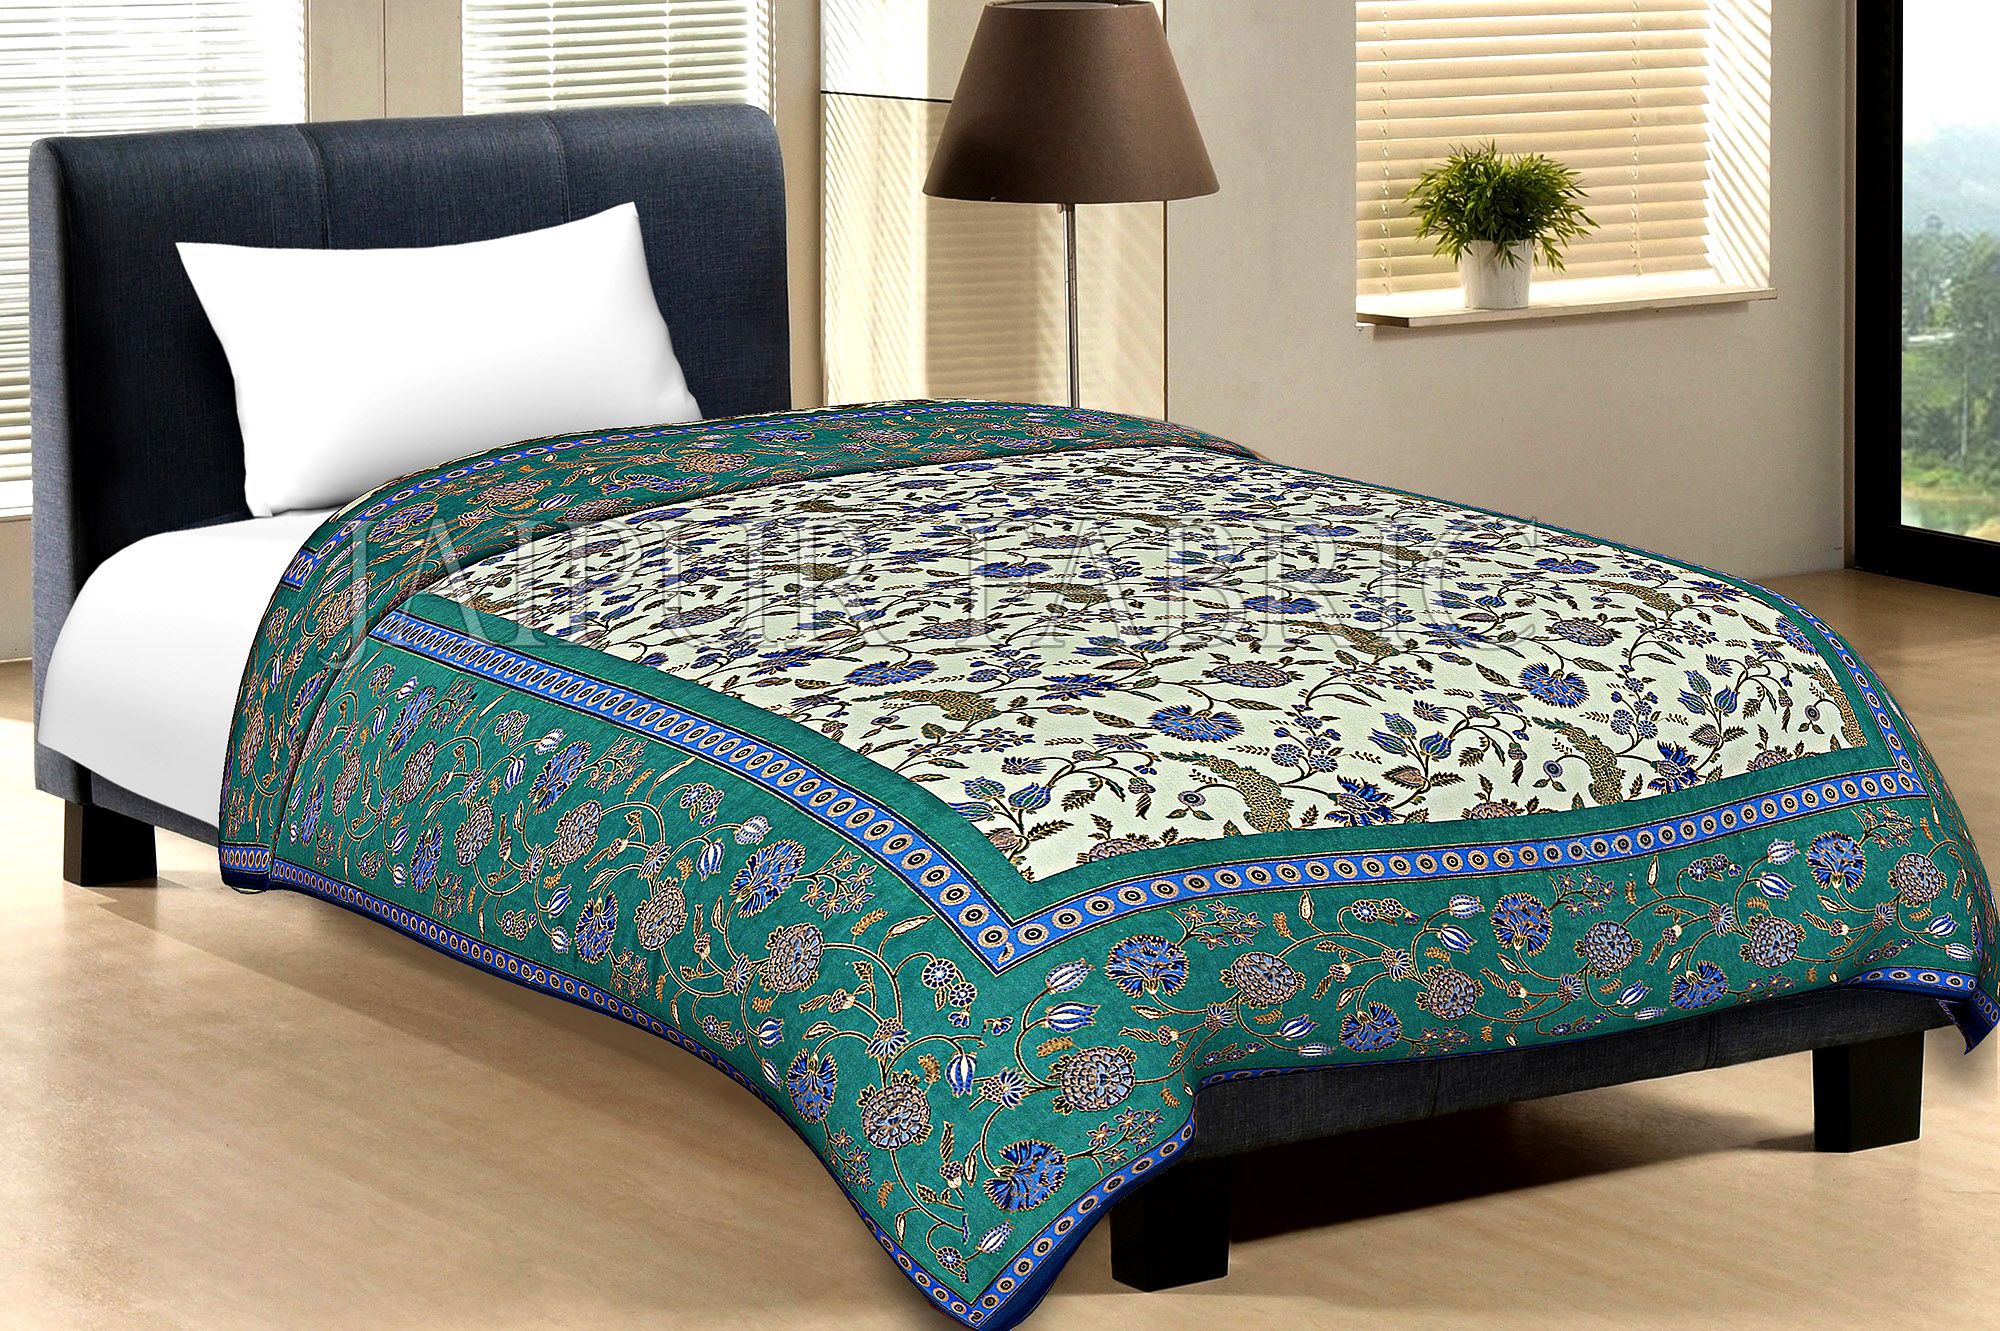 Green Border With Navy Blue Edge Cream Base Leaf And Flower Golden Print Cotton Single Bed Sheet With Out Pillow Cover